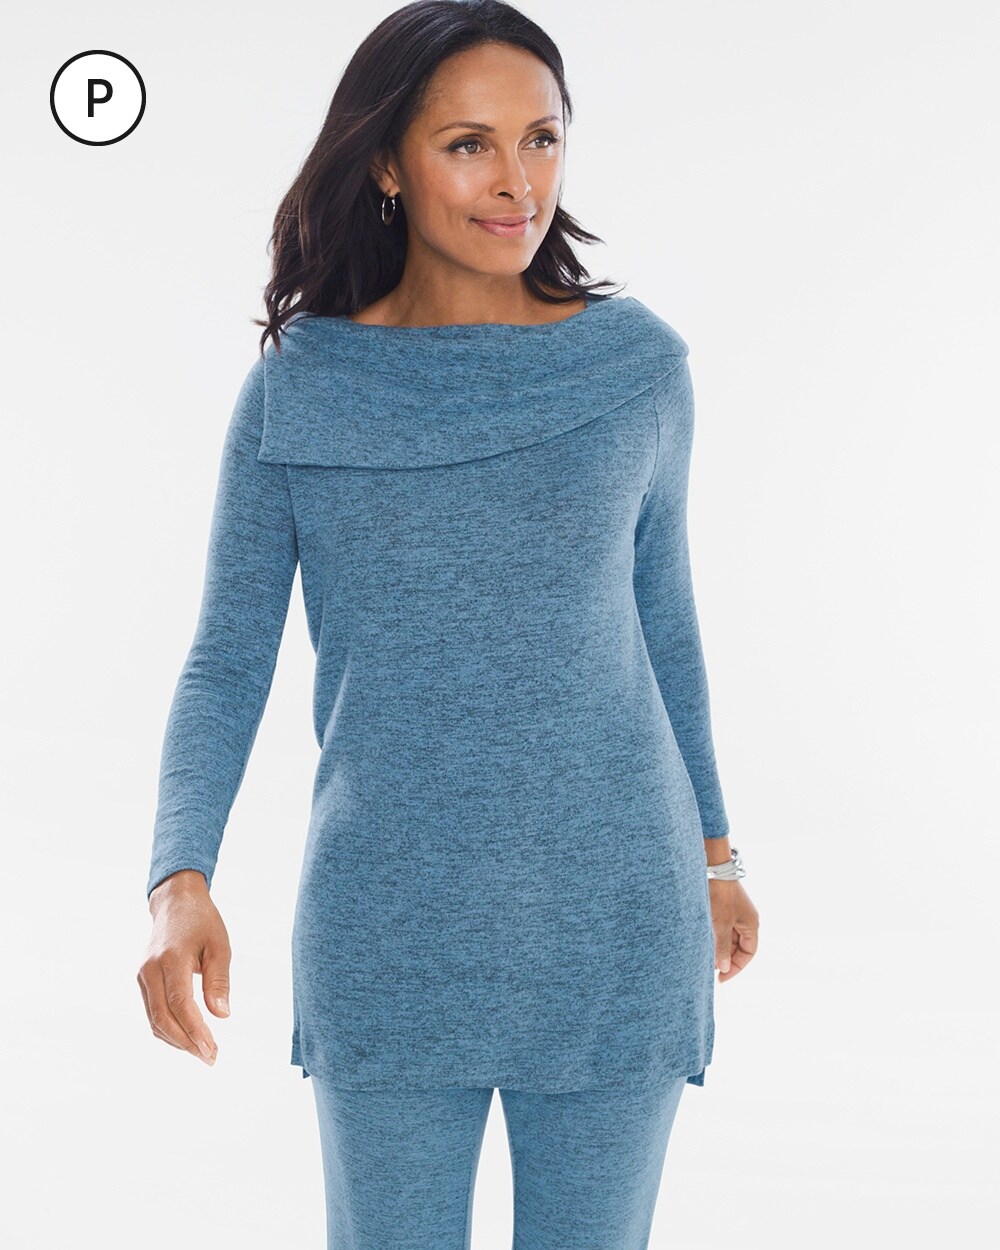 Zenergy Petite Knit Collection Cozy Pullover